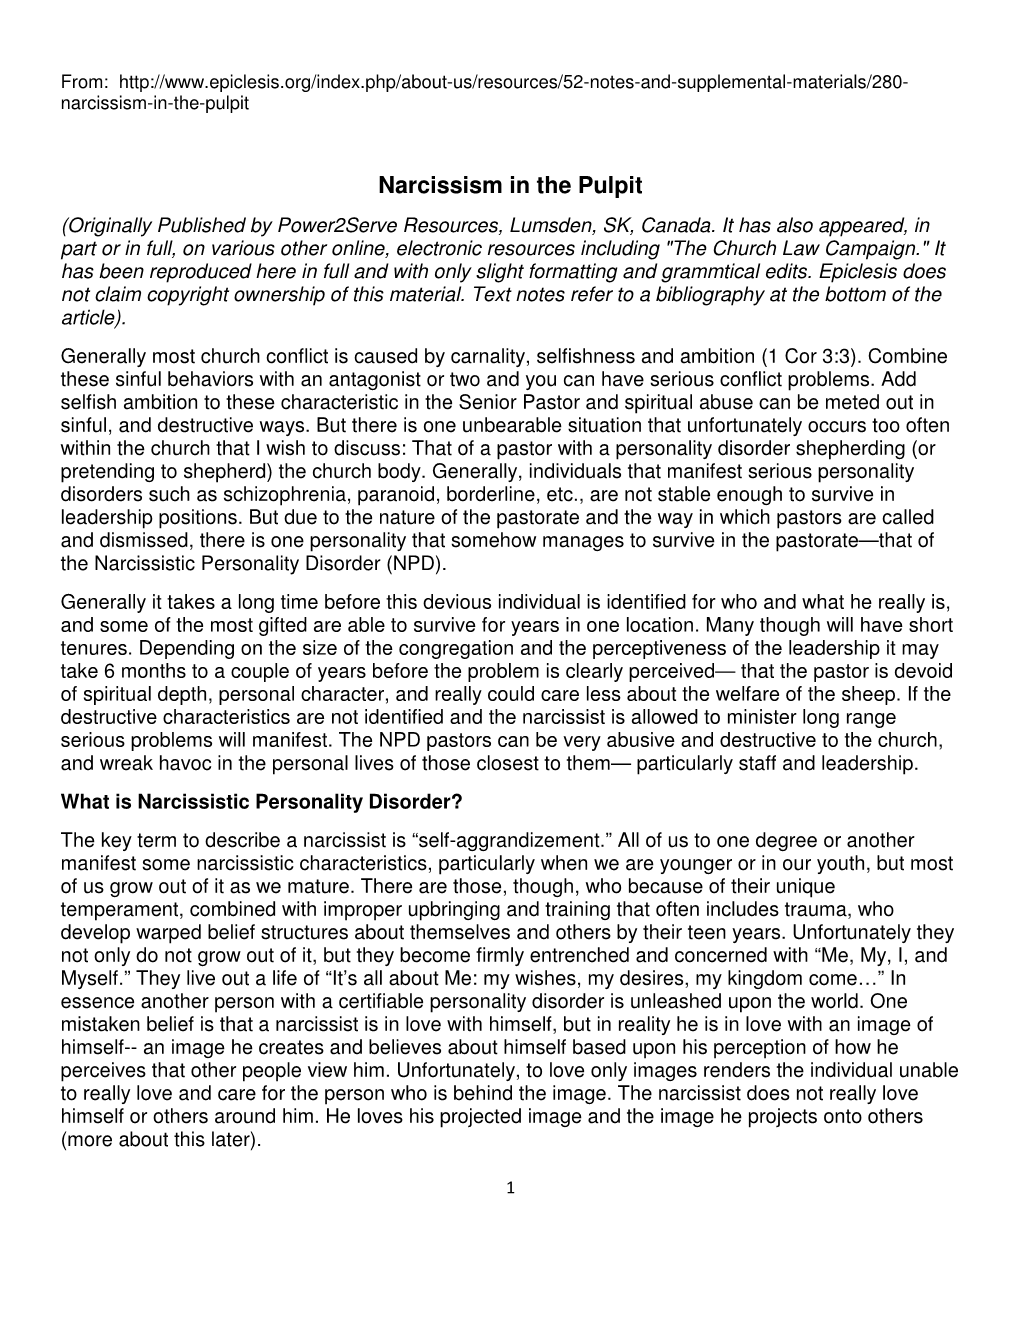 Narcissism in the Pulpit (Originally Published by Power2serve Resources, Lumsden, SK, Canada